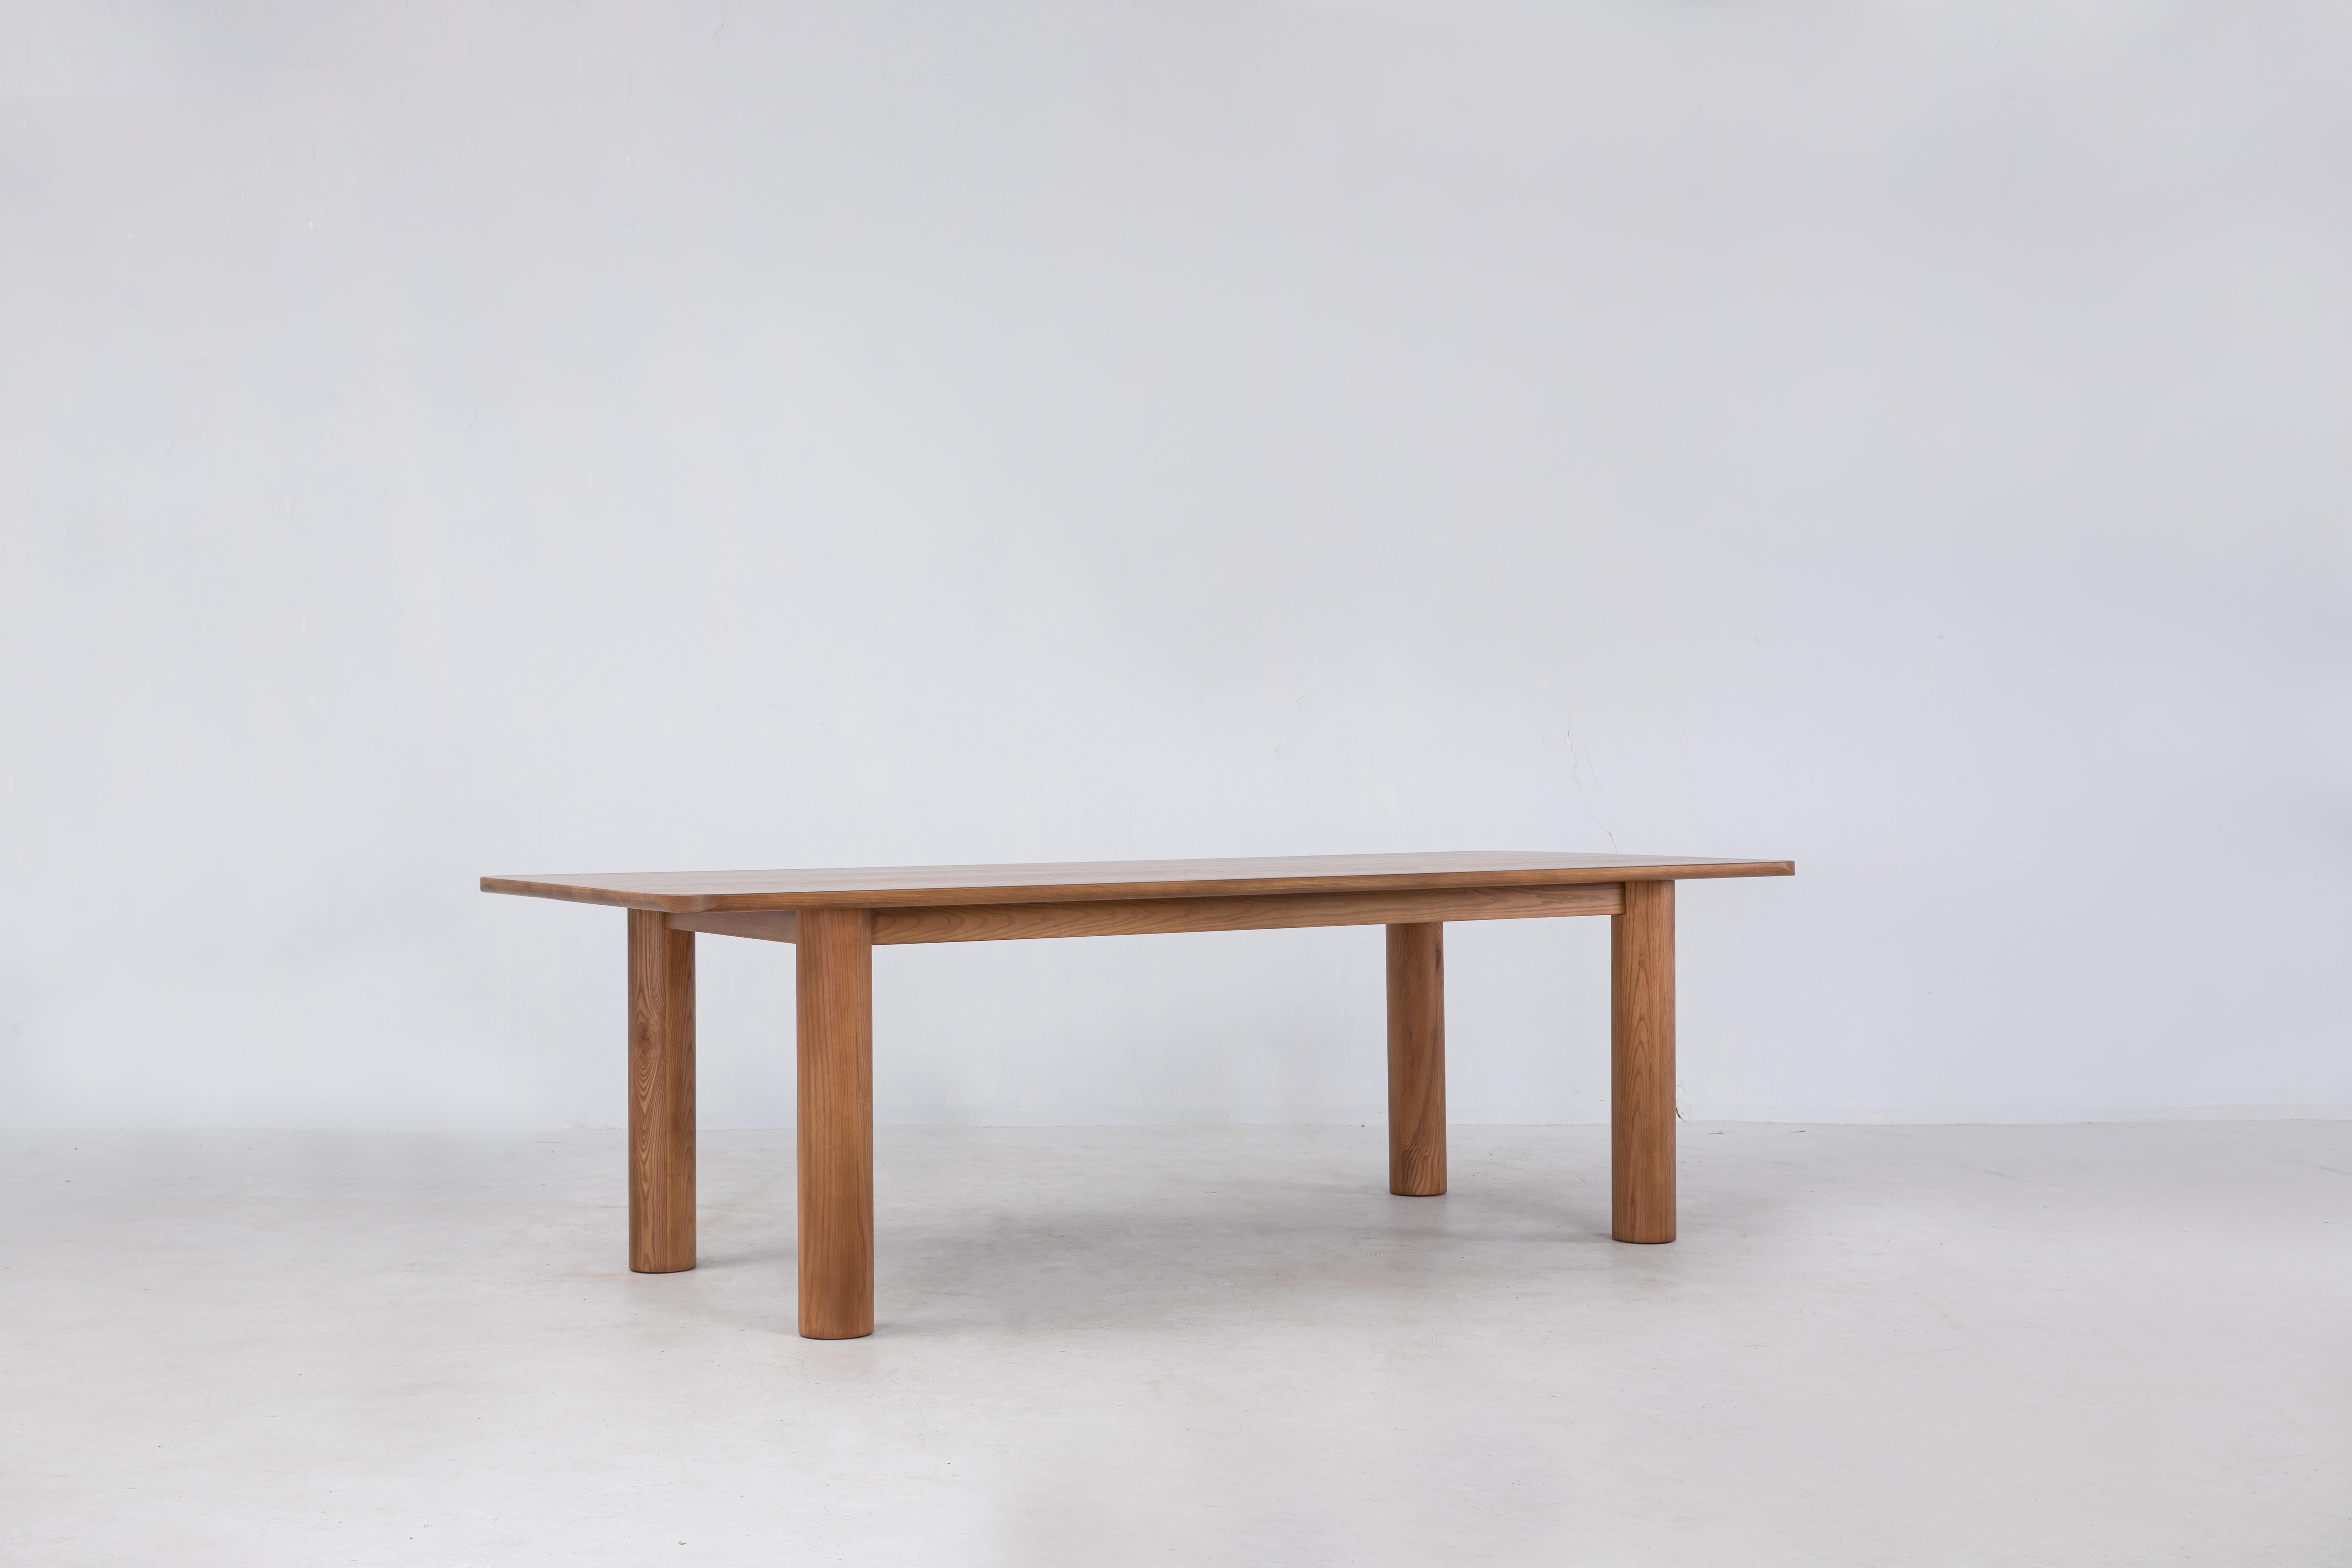 Arc Dining Table 98", Sienna, Minimalist Dining Table in Wood in FSC White Ash